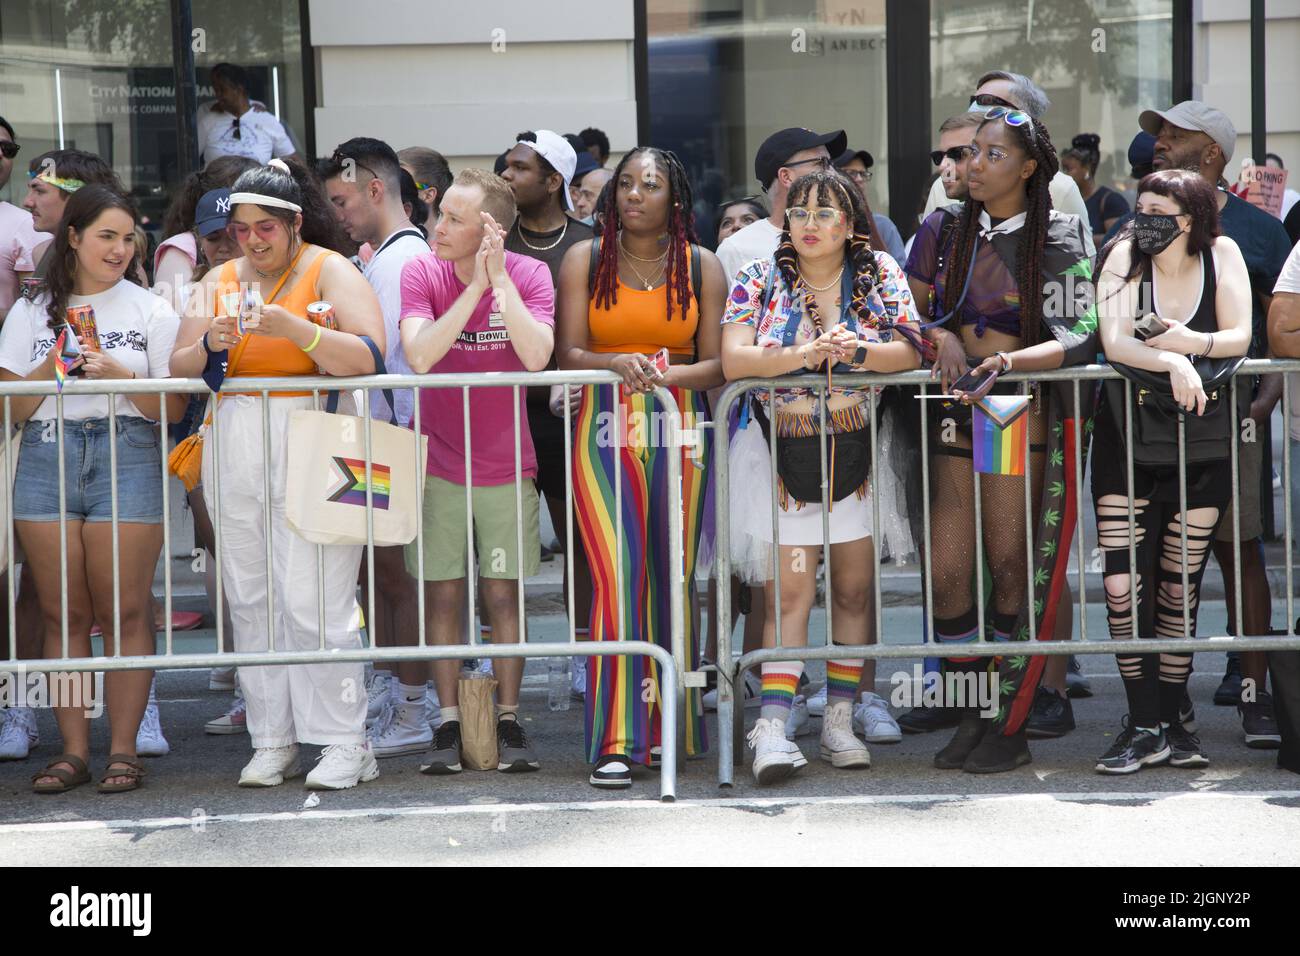 The annual Gay Pride Parade returns to march down 5th Avenue  and end up on Christopher Street in Greenwich Village after a 3 year break due to the Covid-19 pandemic. Spectators were out in large numbers in support of the LGBTQ community. Stock Photo